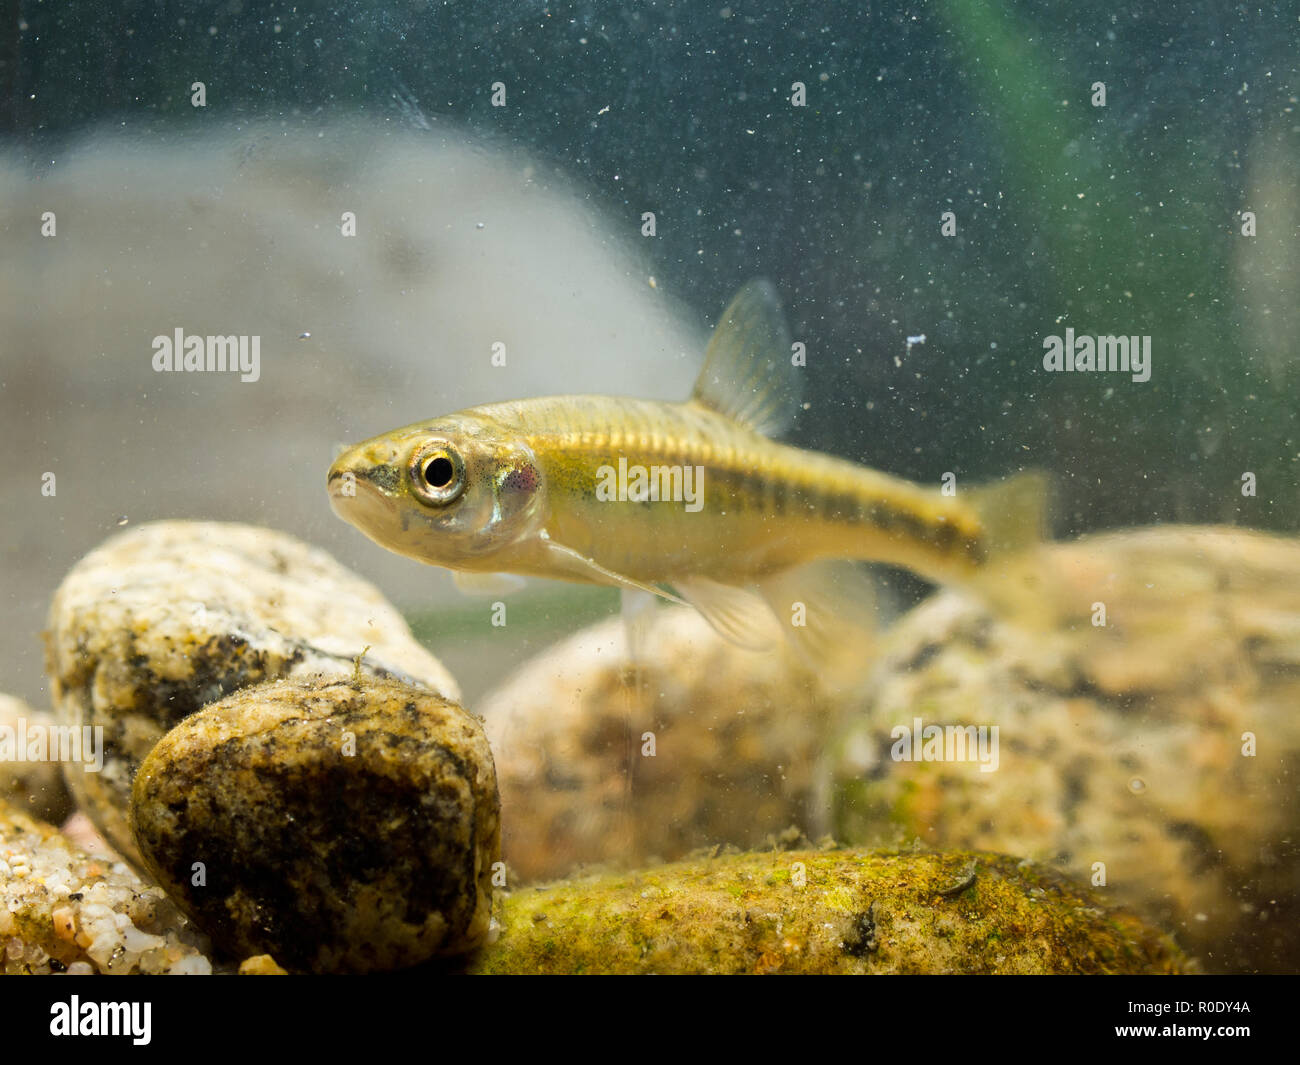 Eurasian minnow (Phoxinus phoxinus) is a Small Fish Carp Family Member living in fast flowing rivers in Eurasia Stock Photo